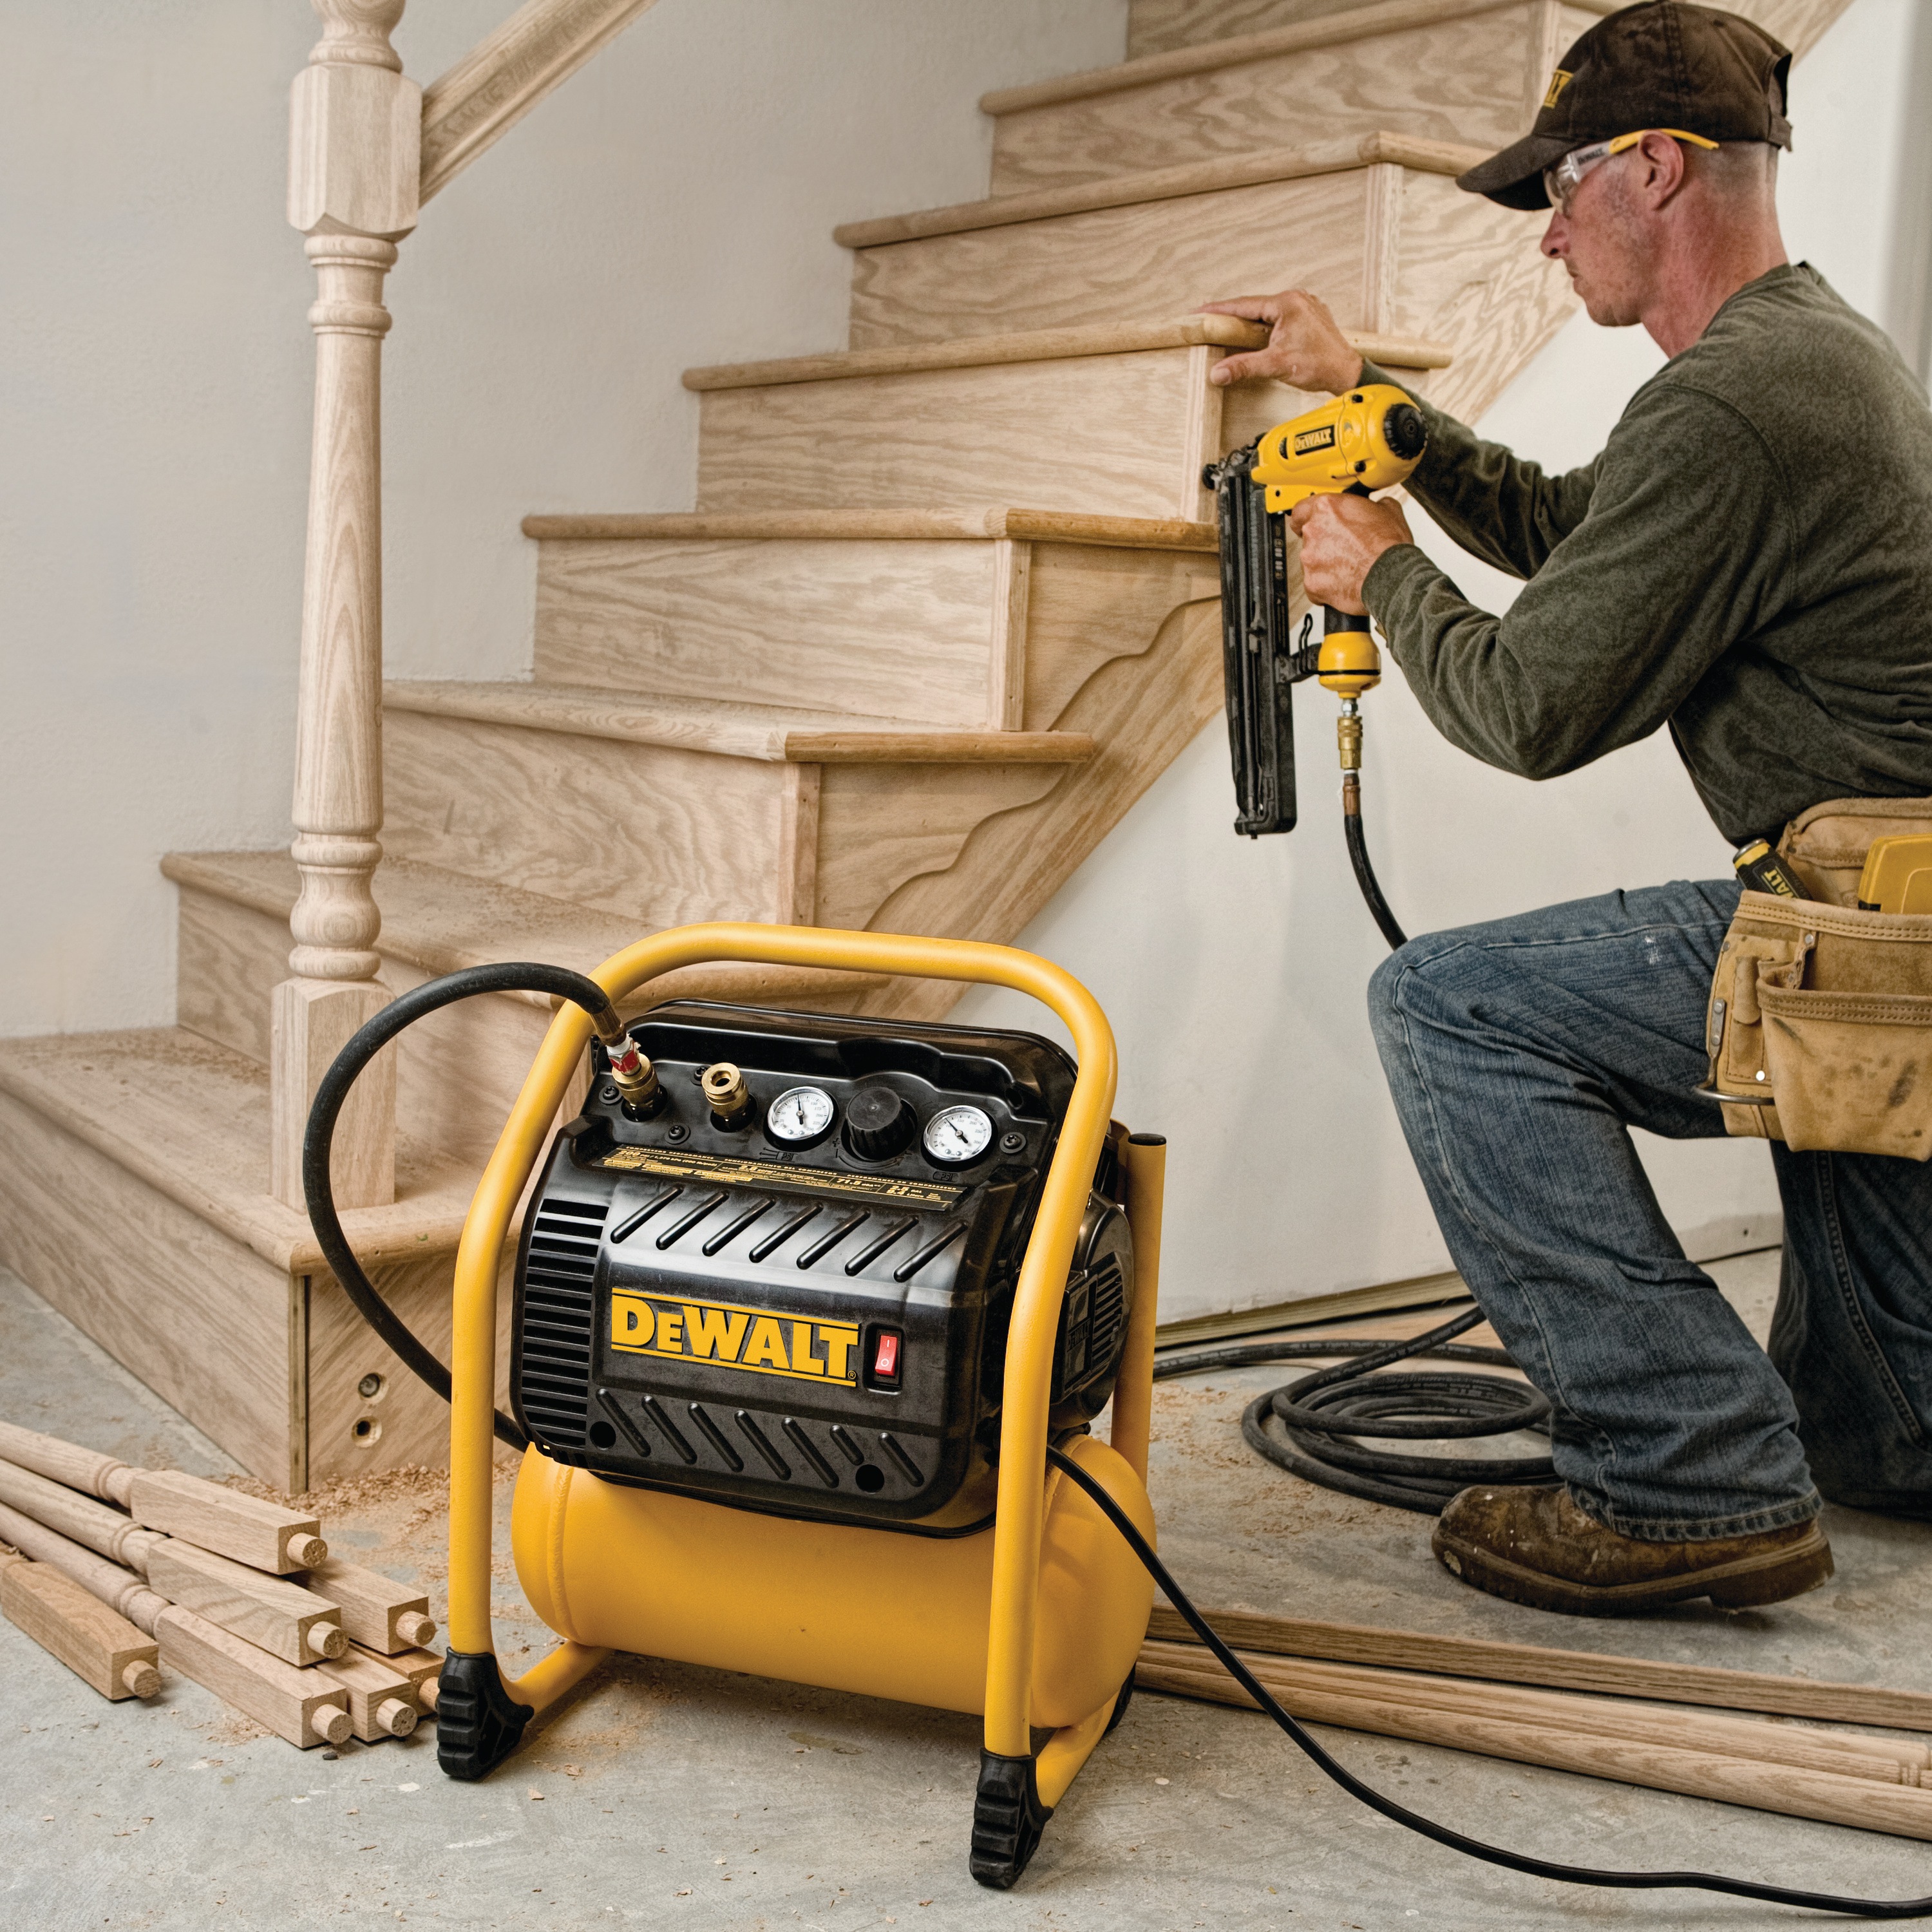 Close up of 200 pounds per square inch Quiet trim compressor being used by a person to drill on wooden stairs.